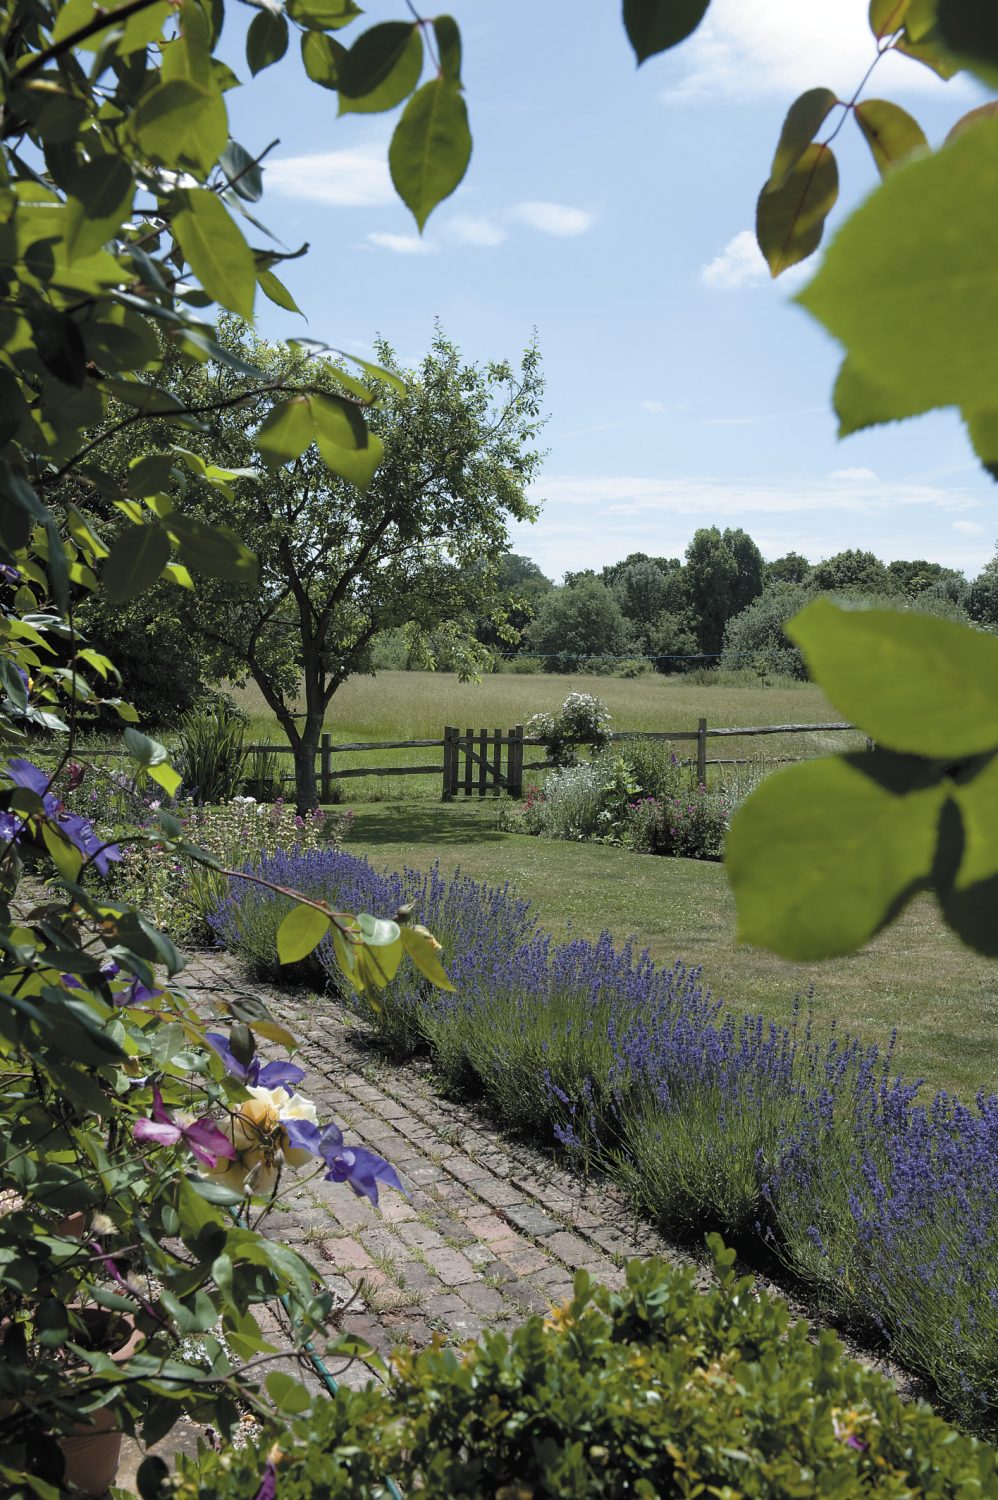 A lavender-edged brick path leads the eye towards the unspoilt meadow beyond